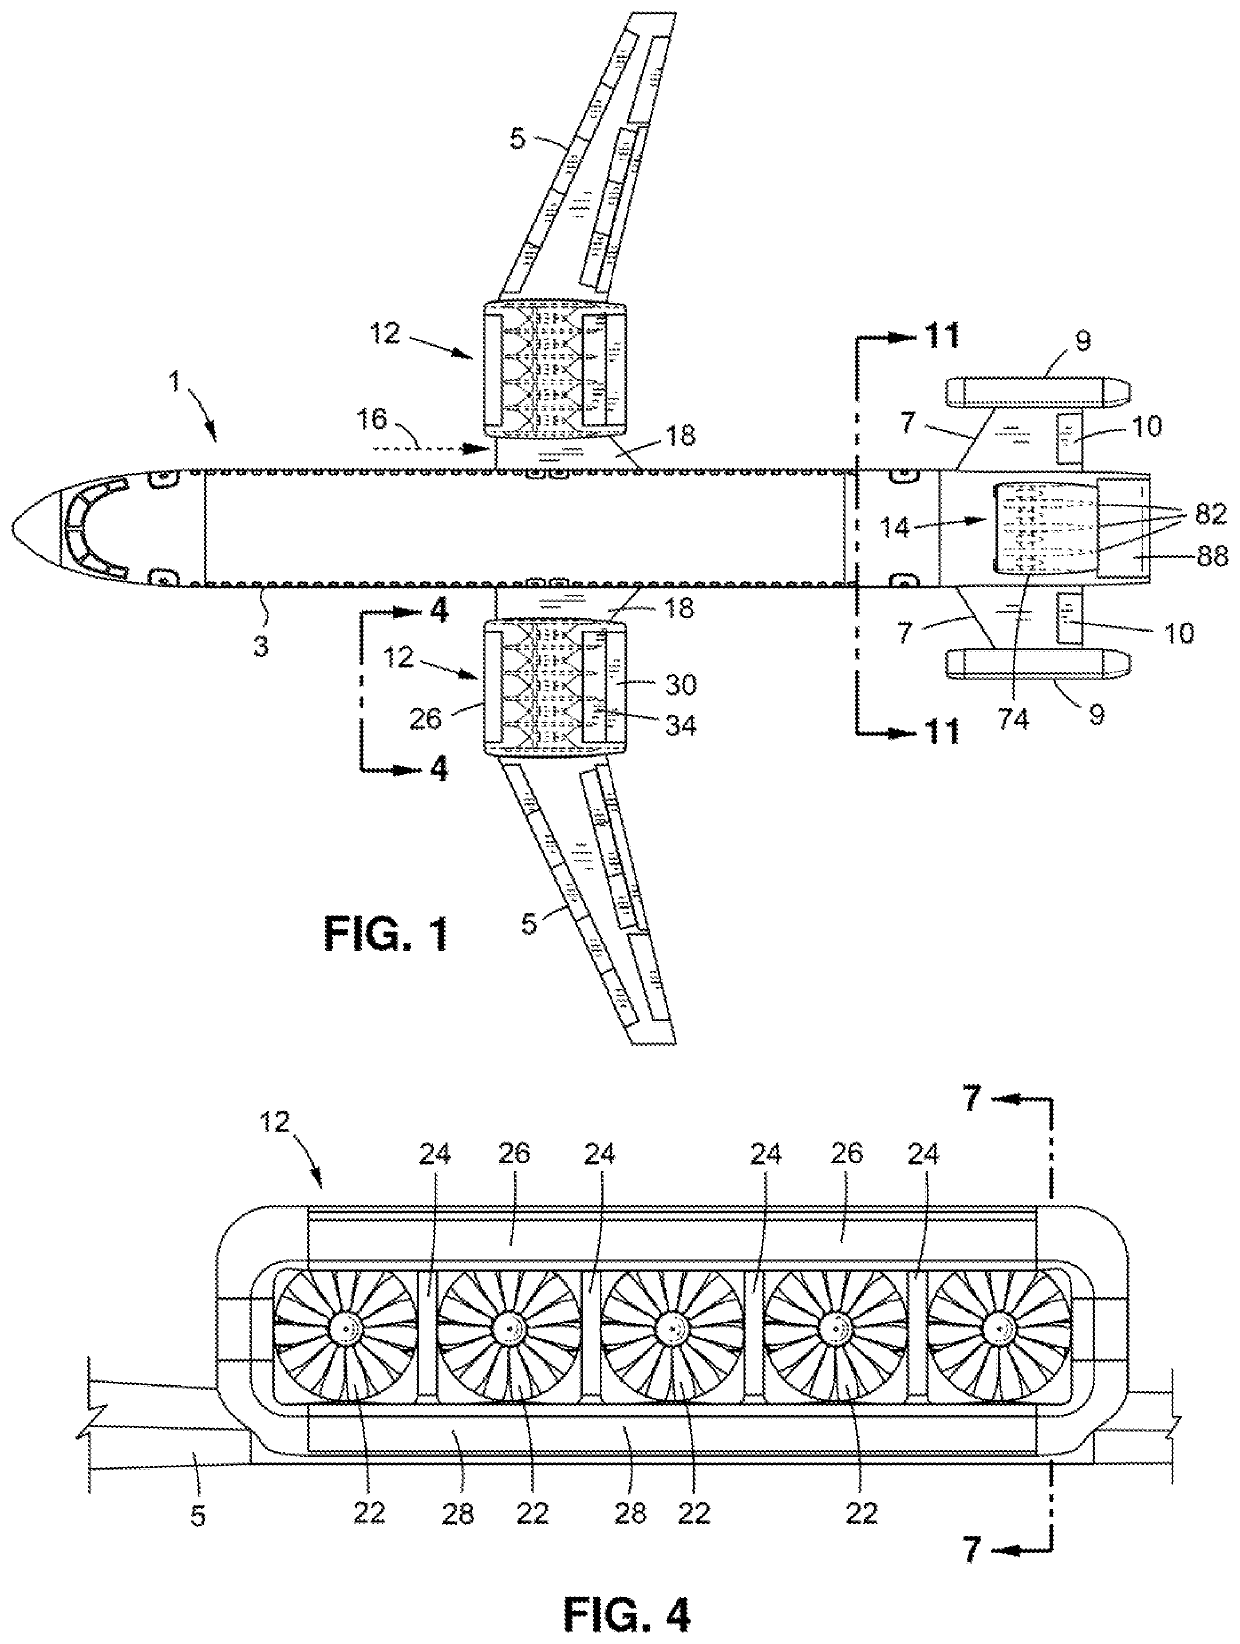 Multi-function nacelles for an aircraft